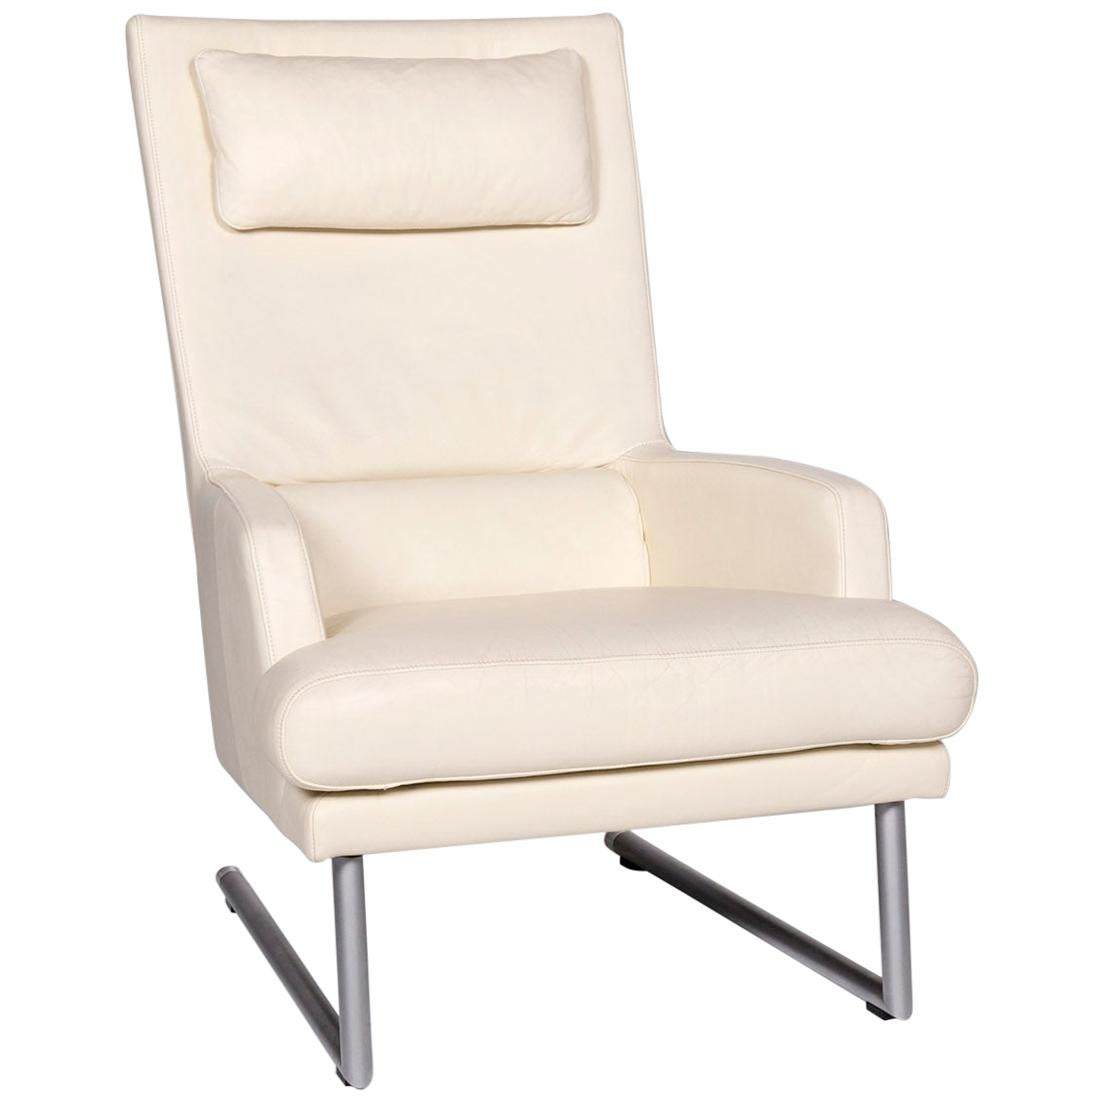 Rolf Benz Leather Armchair Incl. Stool Cream For Sale